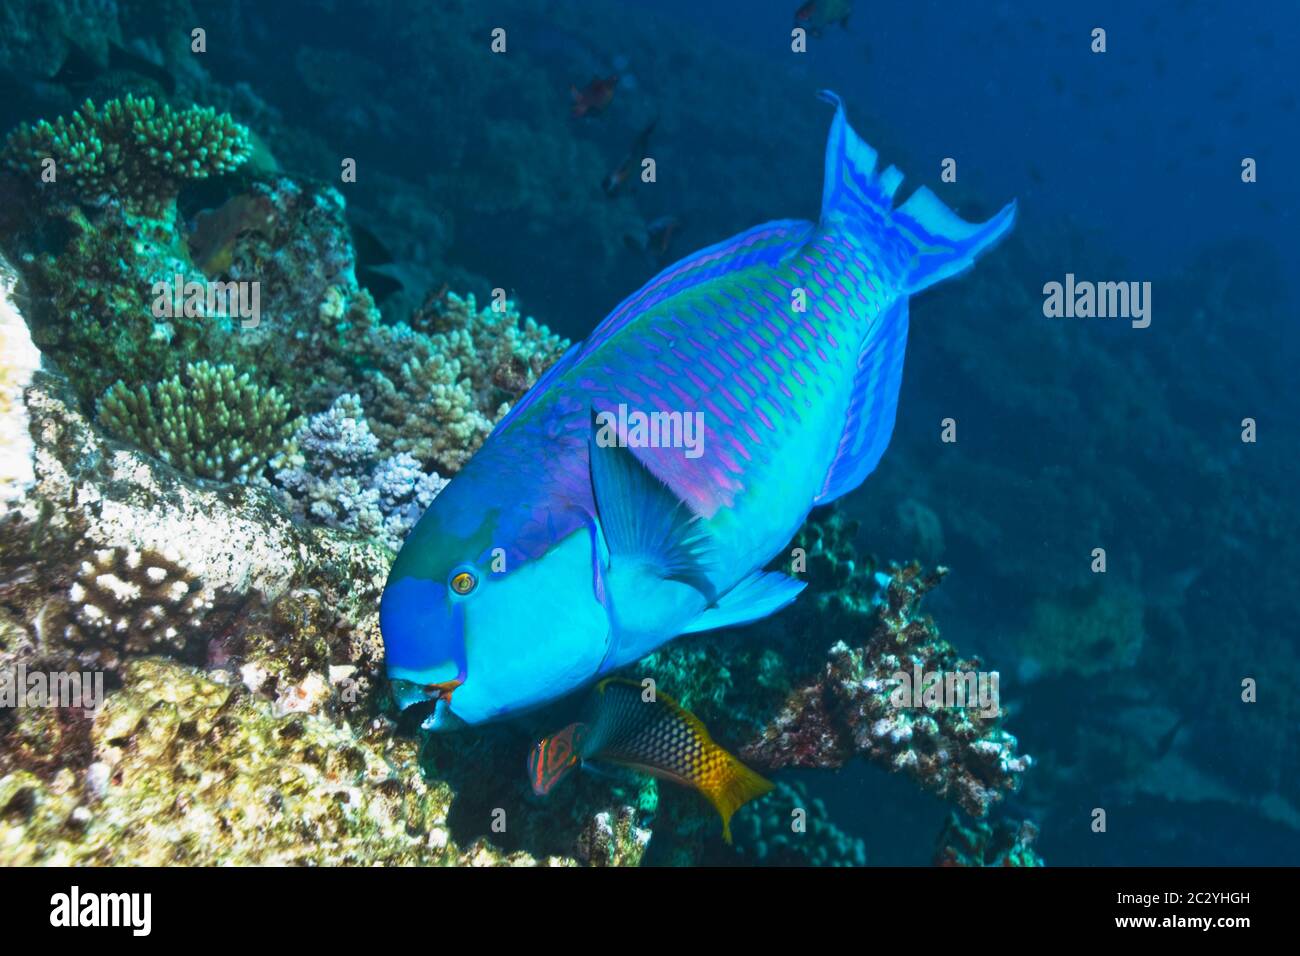 Steep headed parrotfish (Scarus gibbus), feeding male followed by a Chequerboard wrasse (Halichoeres hortulanus).  Egypt, Red Sea. Stock Photo